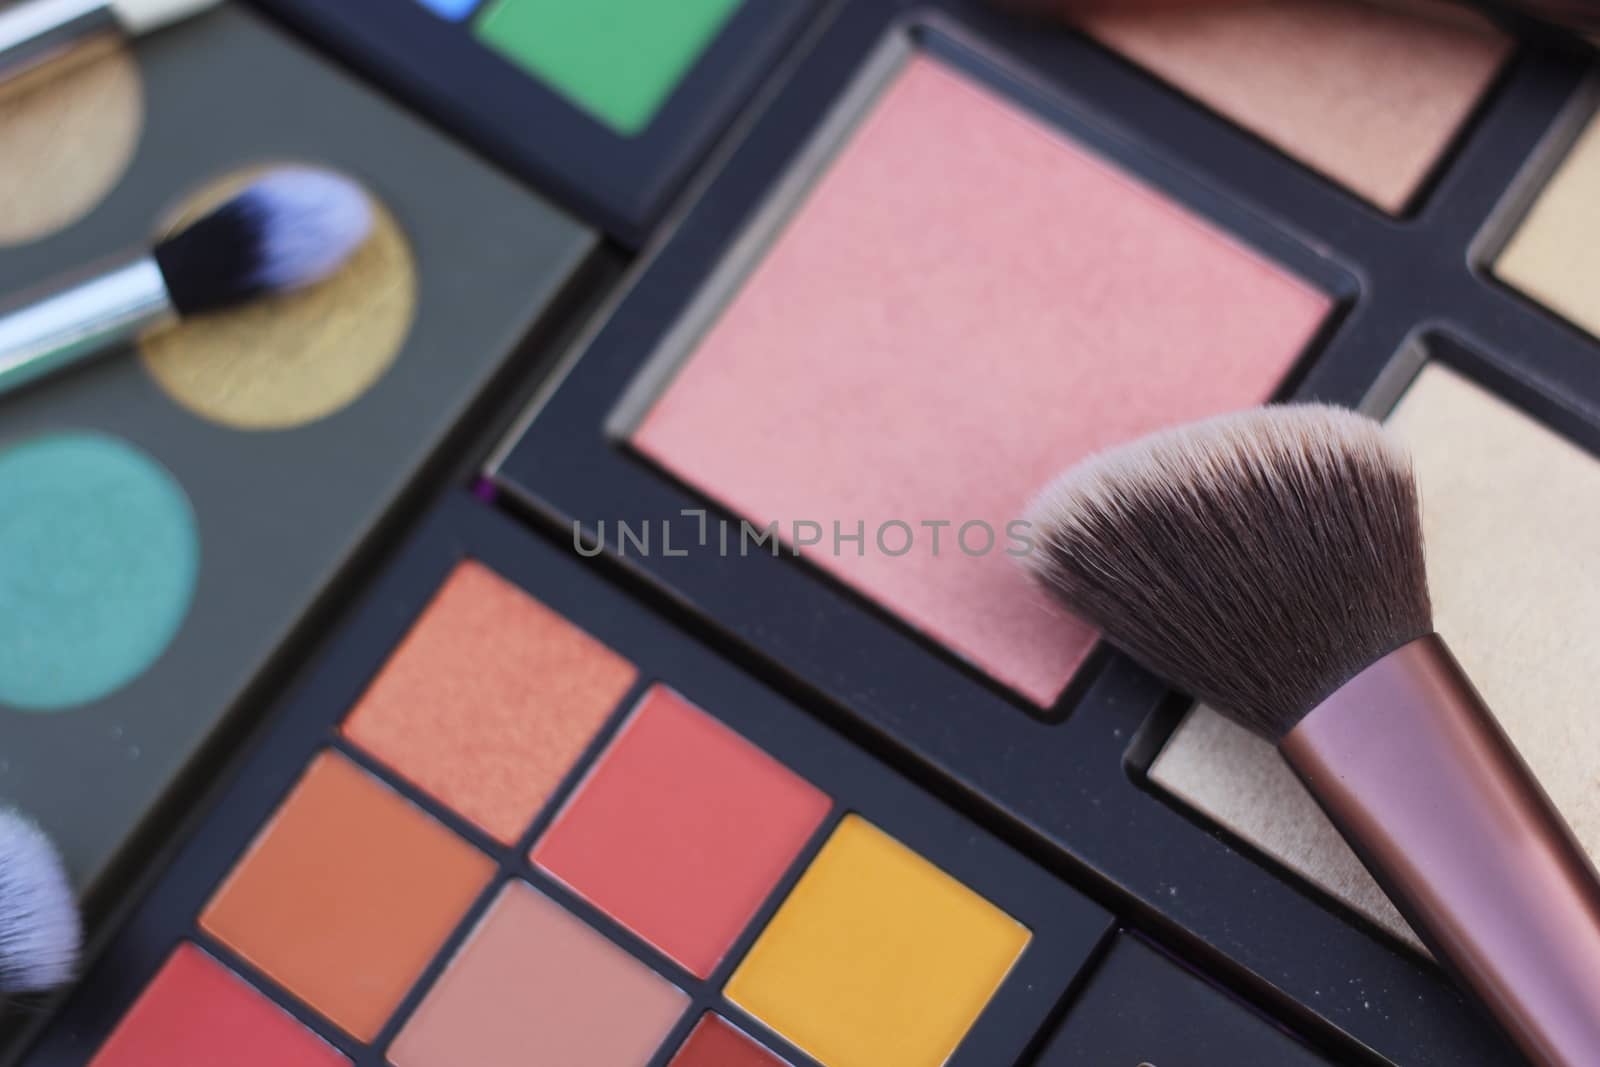 Colorful Cosmetic Pigment Palettes and various cosmetics